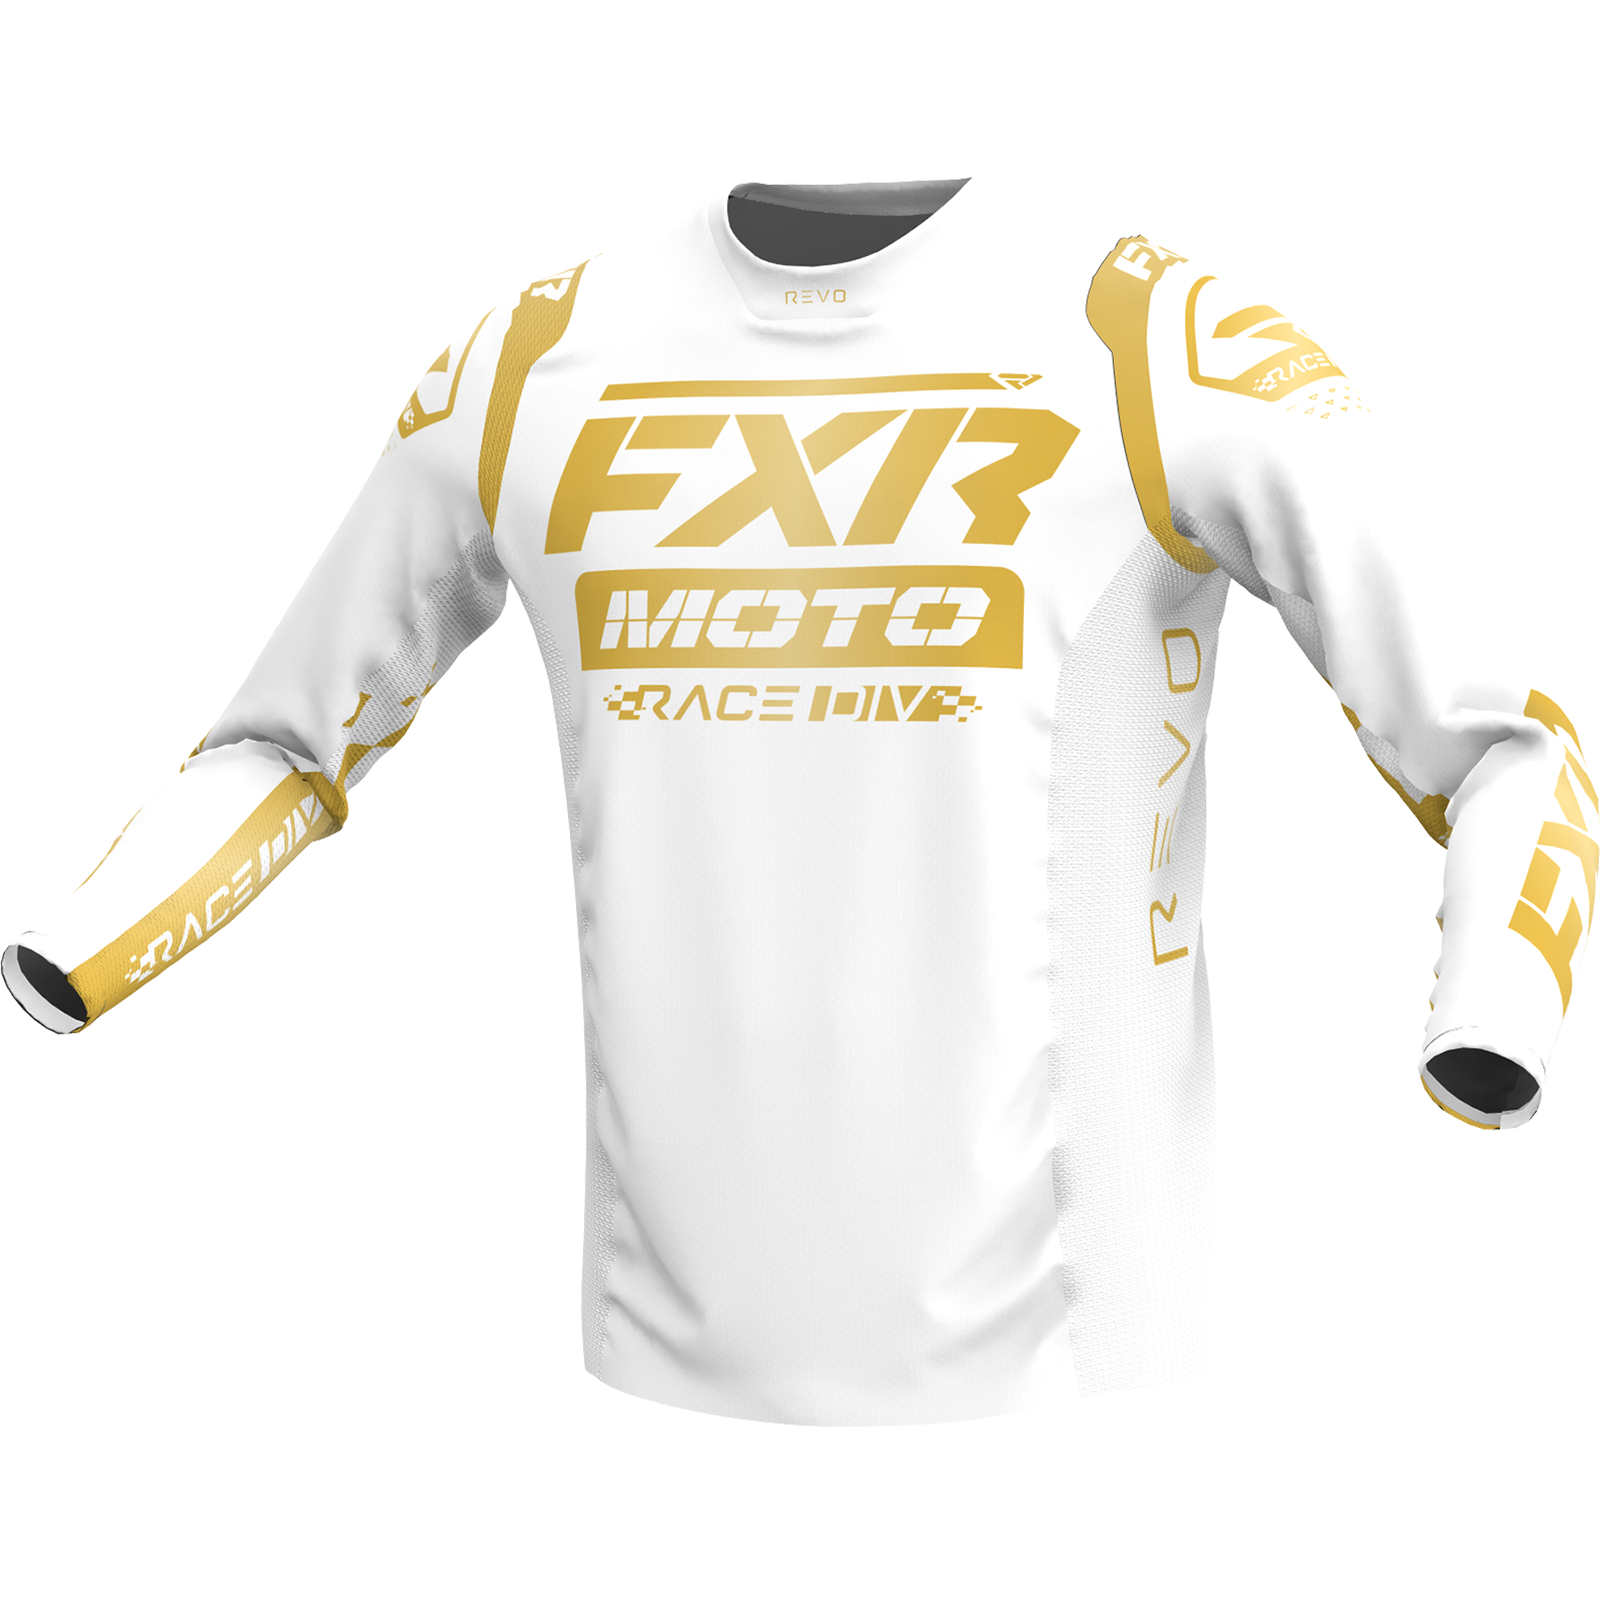 series gold jersey